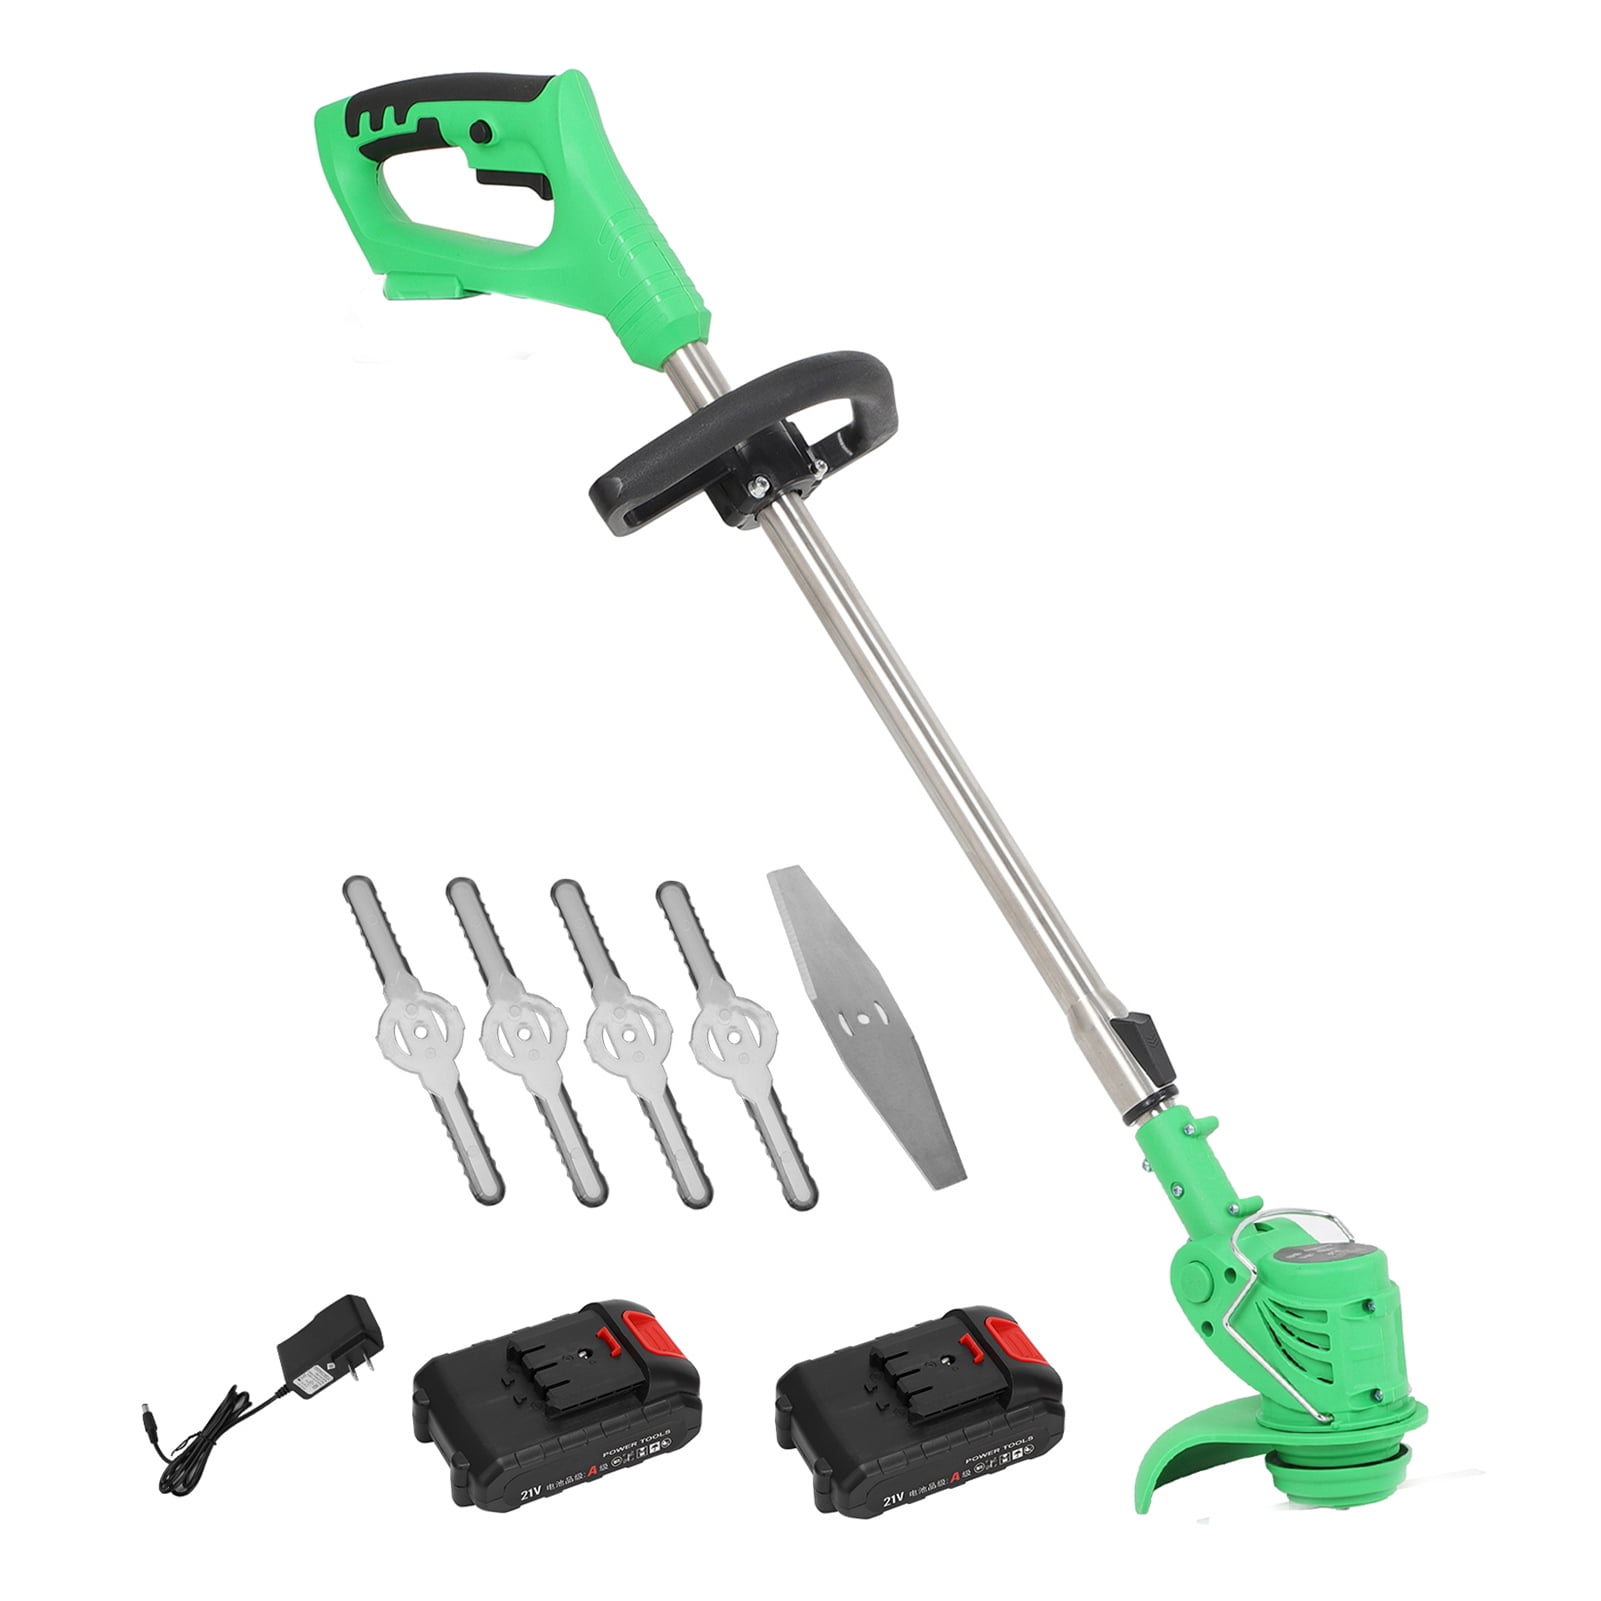 3 Kinds Spare Blades Lawn Care Lightweight Lawn Edger Tool with Wheel MTDWEITOO Edger Lawn Tool Grass Trimmer for Multi-Angle Adjustment Cutting with Battery and Charger 